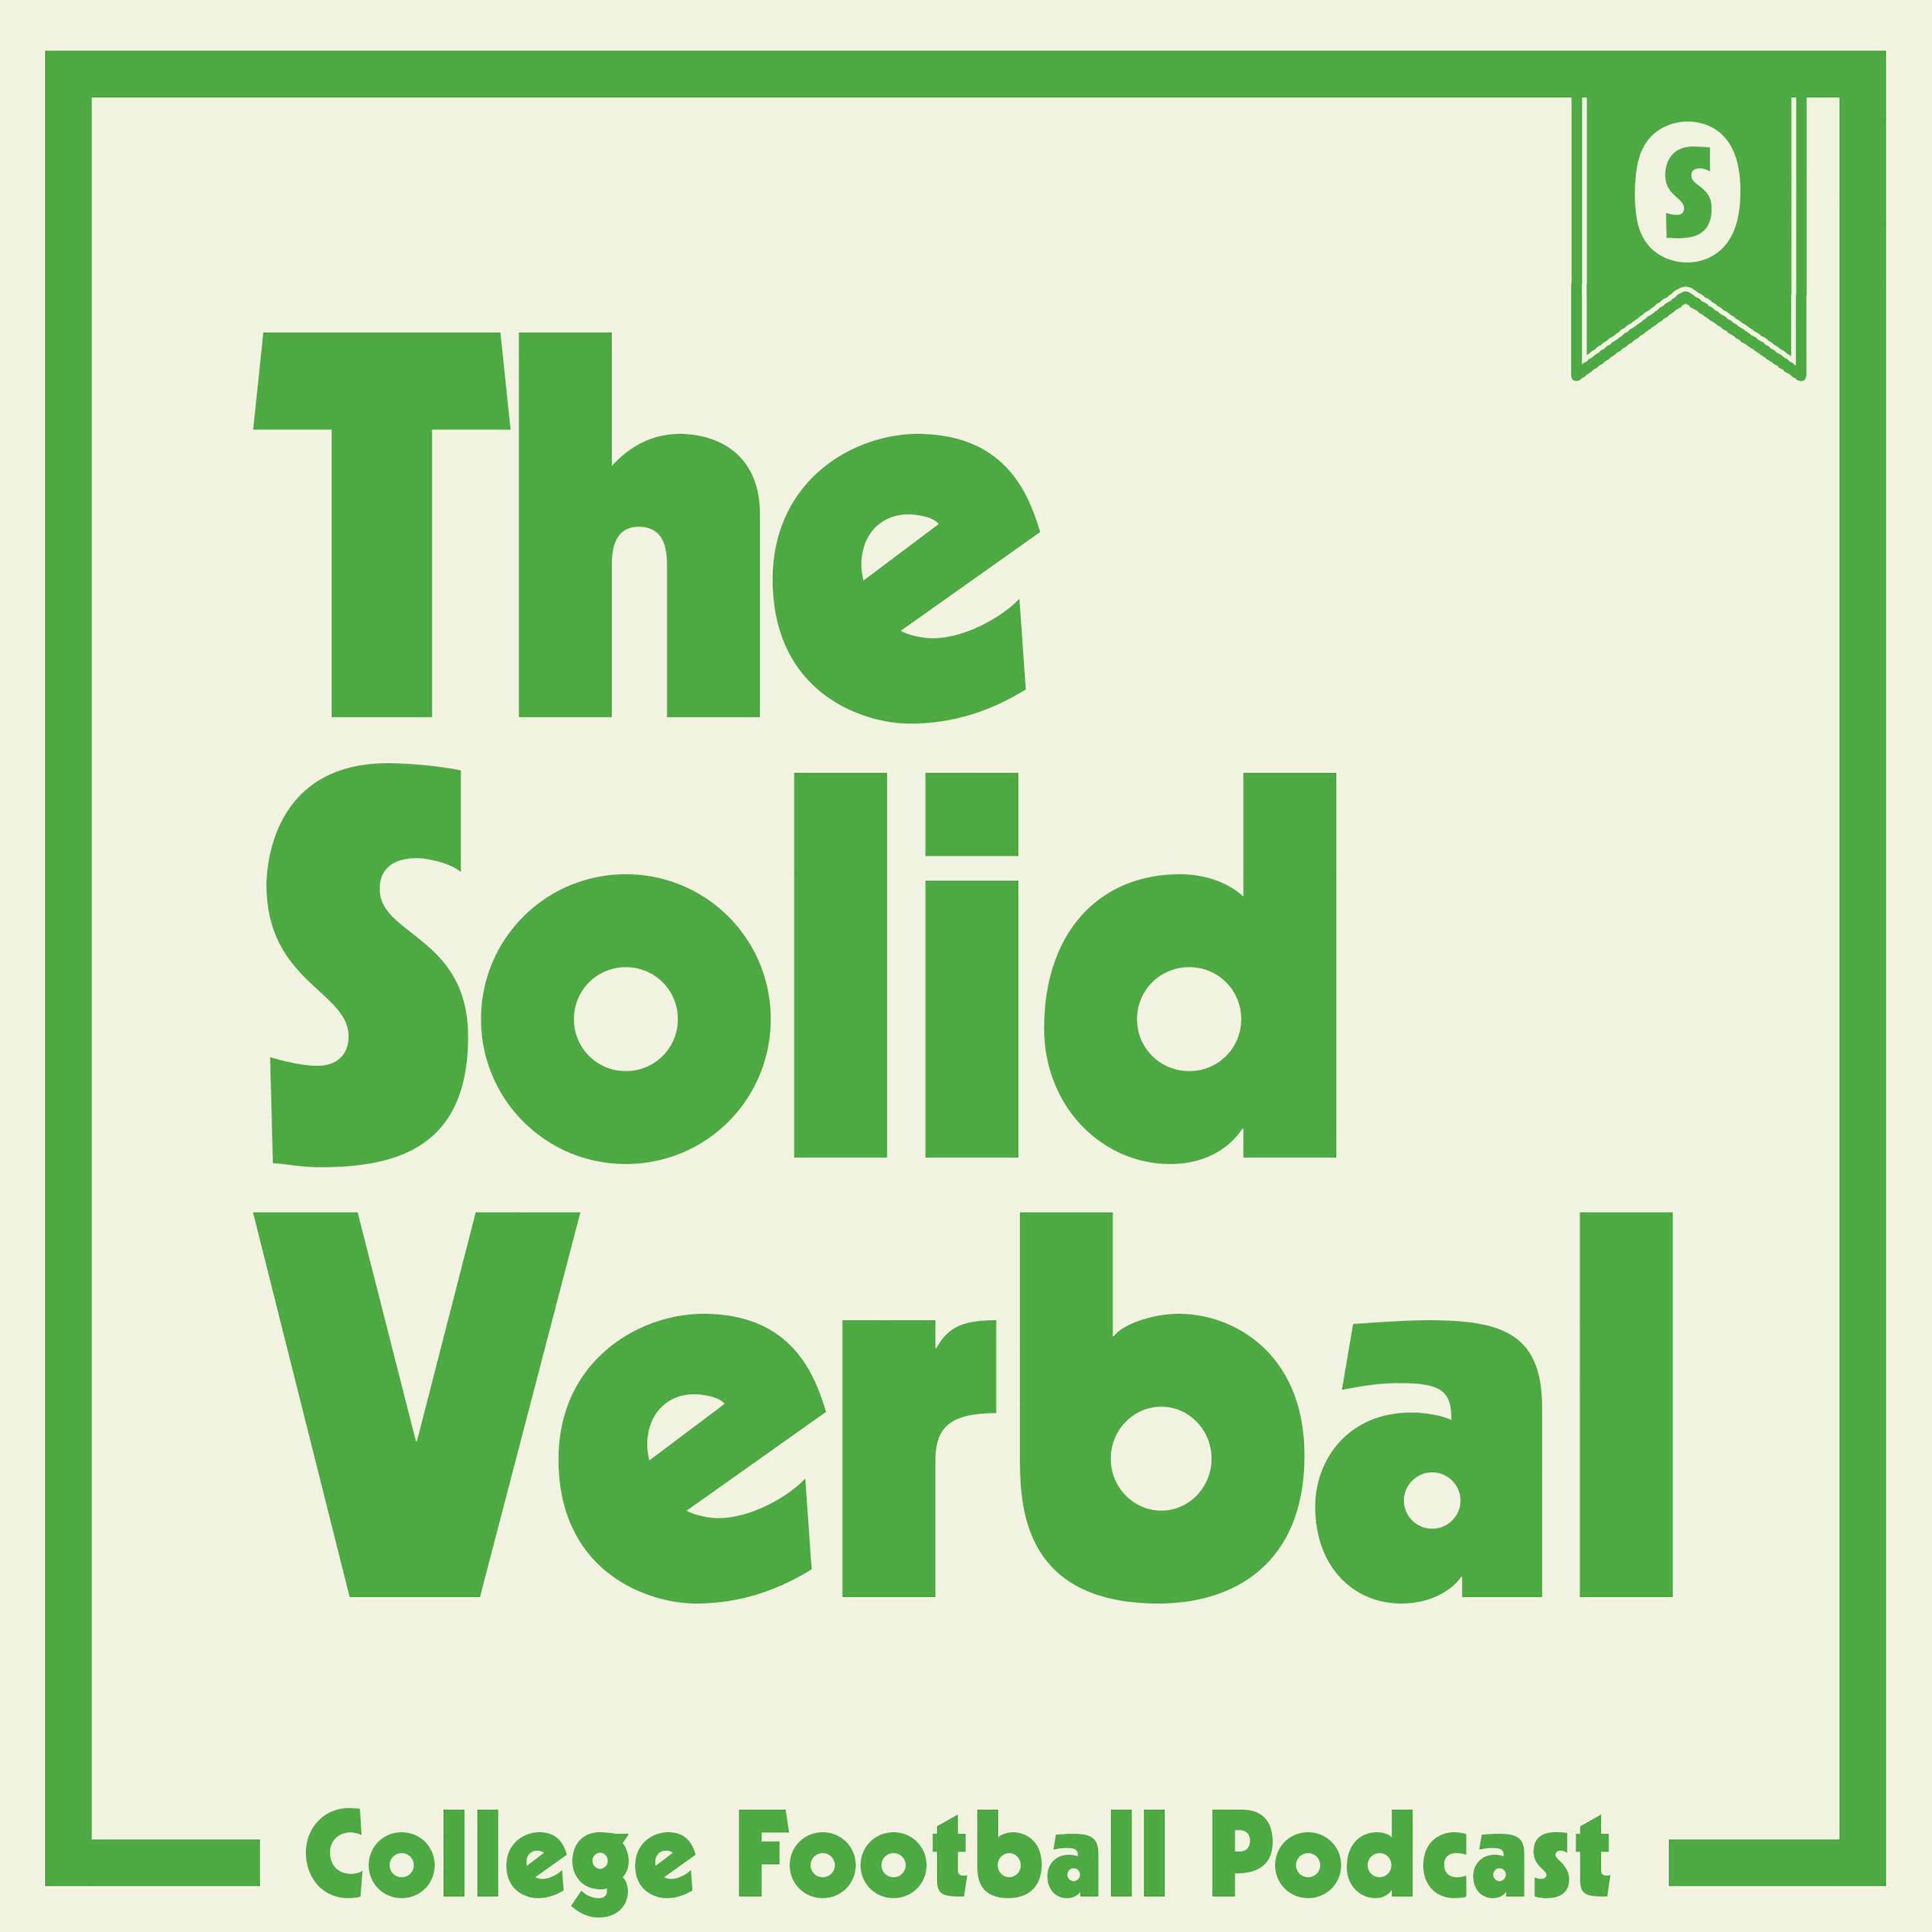 The Solid Verbal - College Football Podcast podcast show image